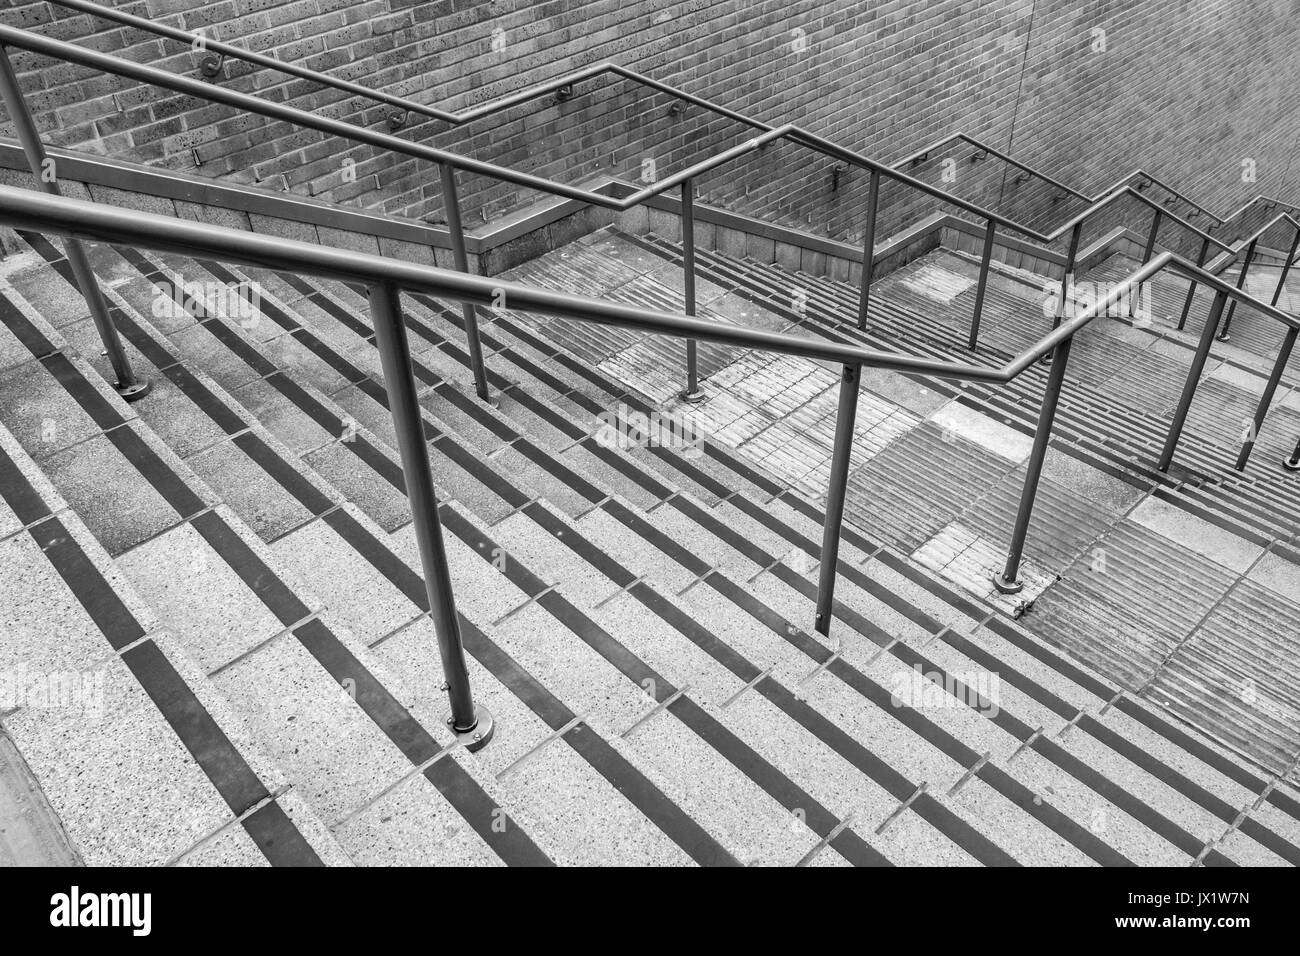 Concrete flight of steps & steel handrails. For urban life, climbing career ladder, corporate ladder, getting on property ladder, staircase to nowhere Stock Photo